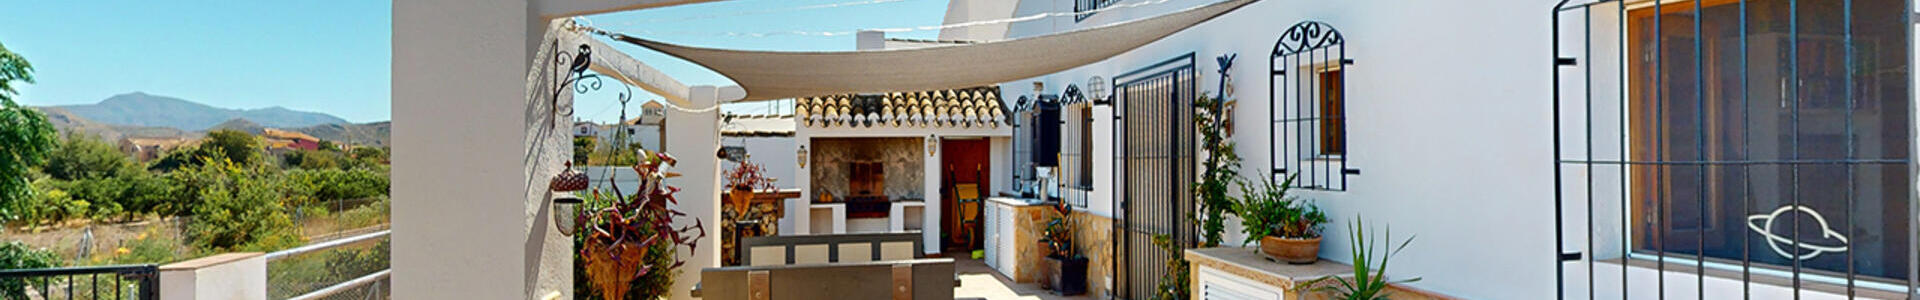 130-1401: 5 Bedroom Cortijo: Traditional Cottage for Sale